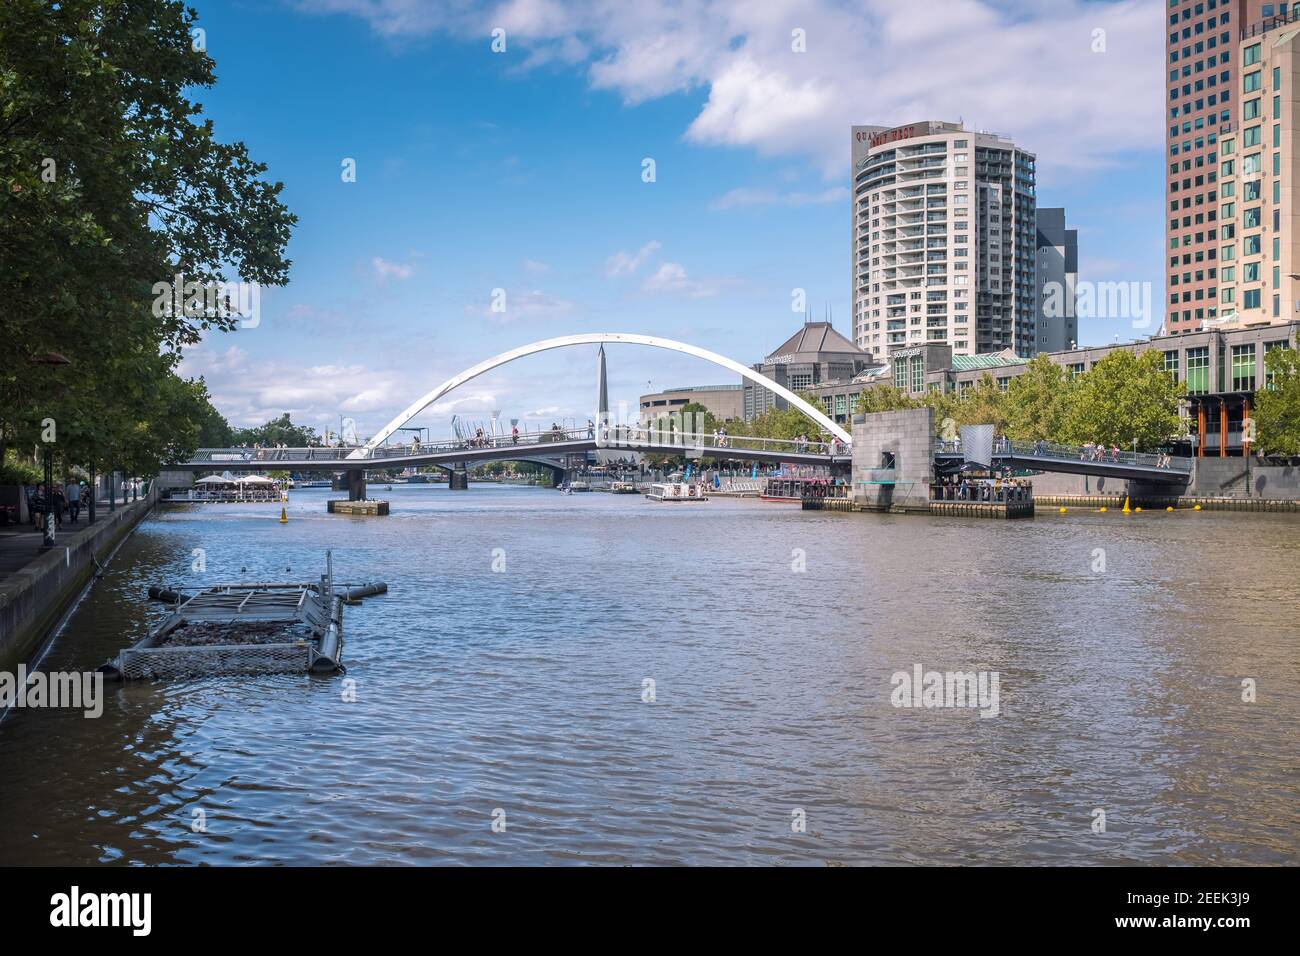 The city of Melbourne, as seen from across the Yarra River - on Southbank Promenade Stock Photo